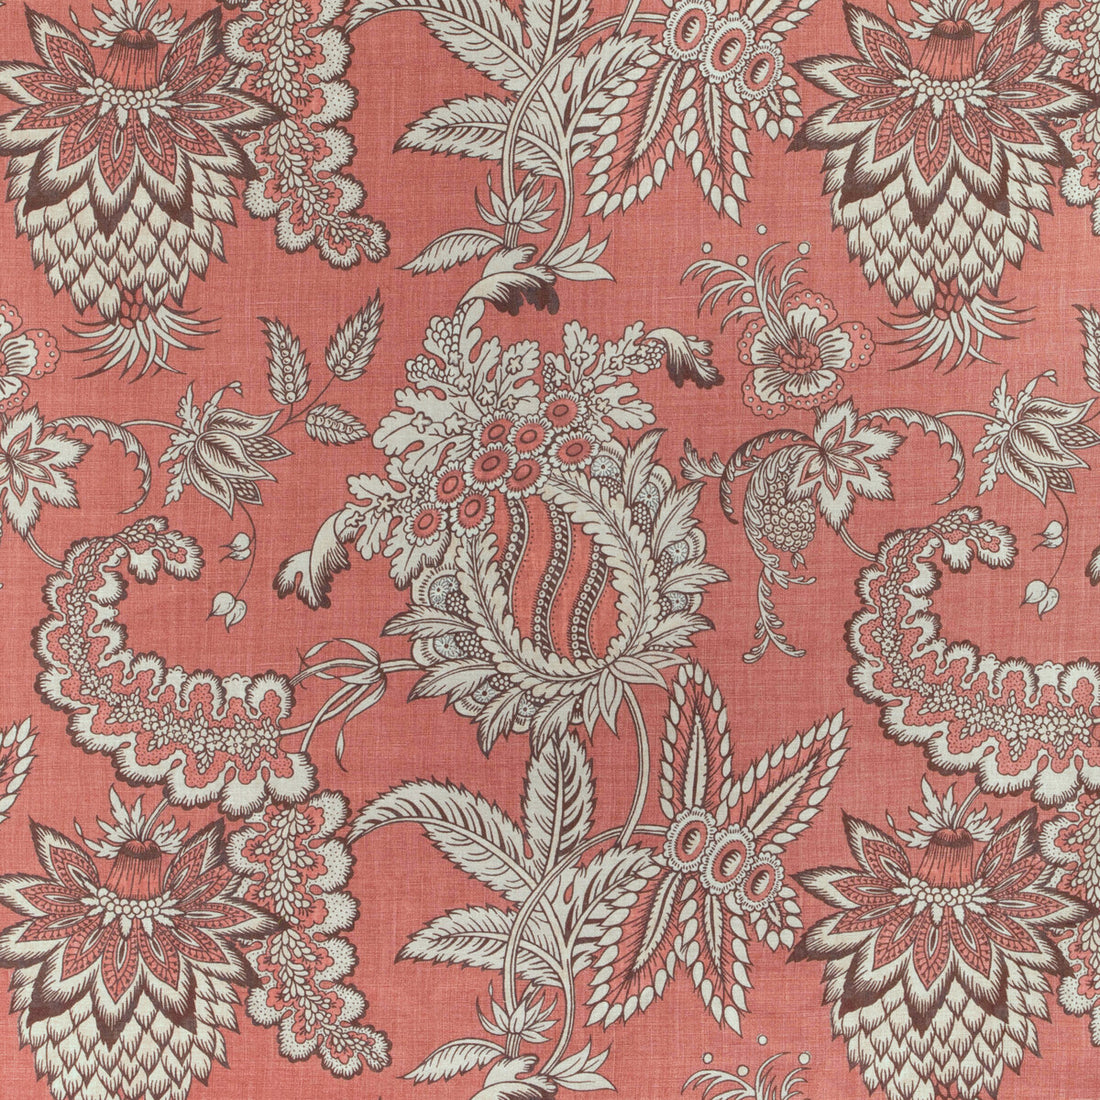 Jennings Print fabric in red color - pattern 2022115.19.0 - by Lee Jofa in the Bunny Williams Arcadia collection